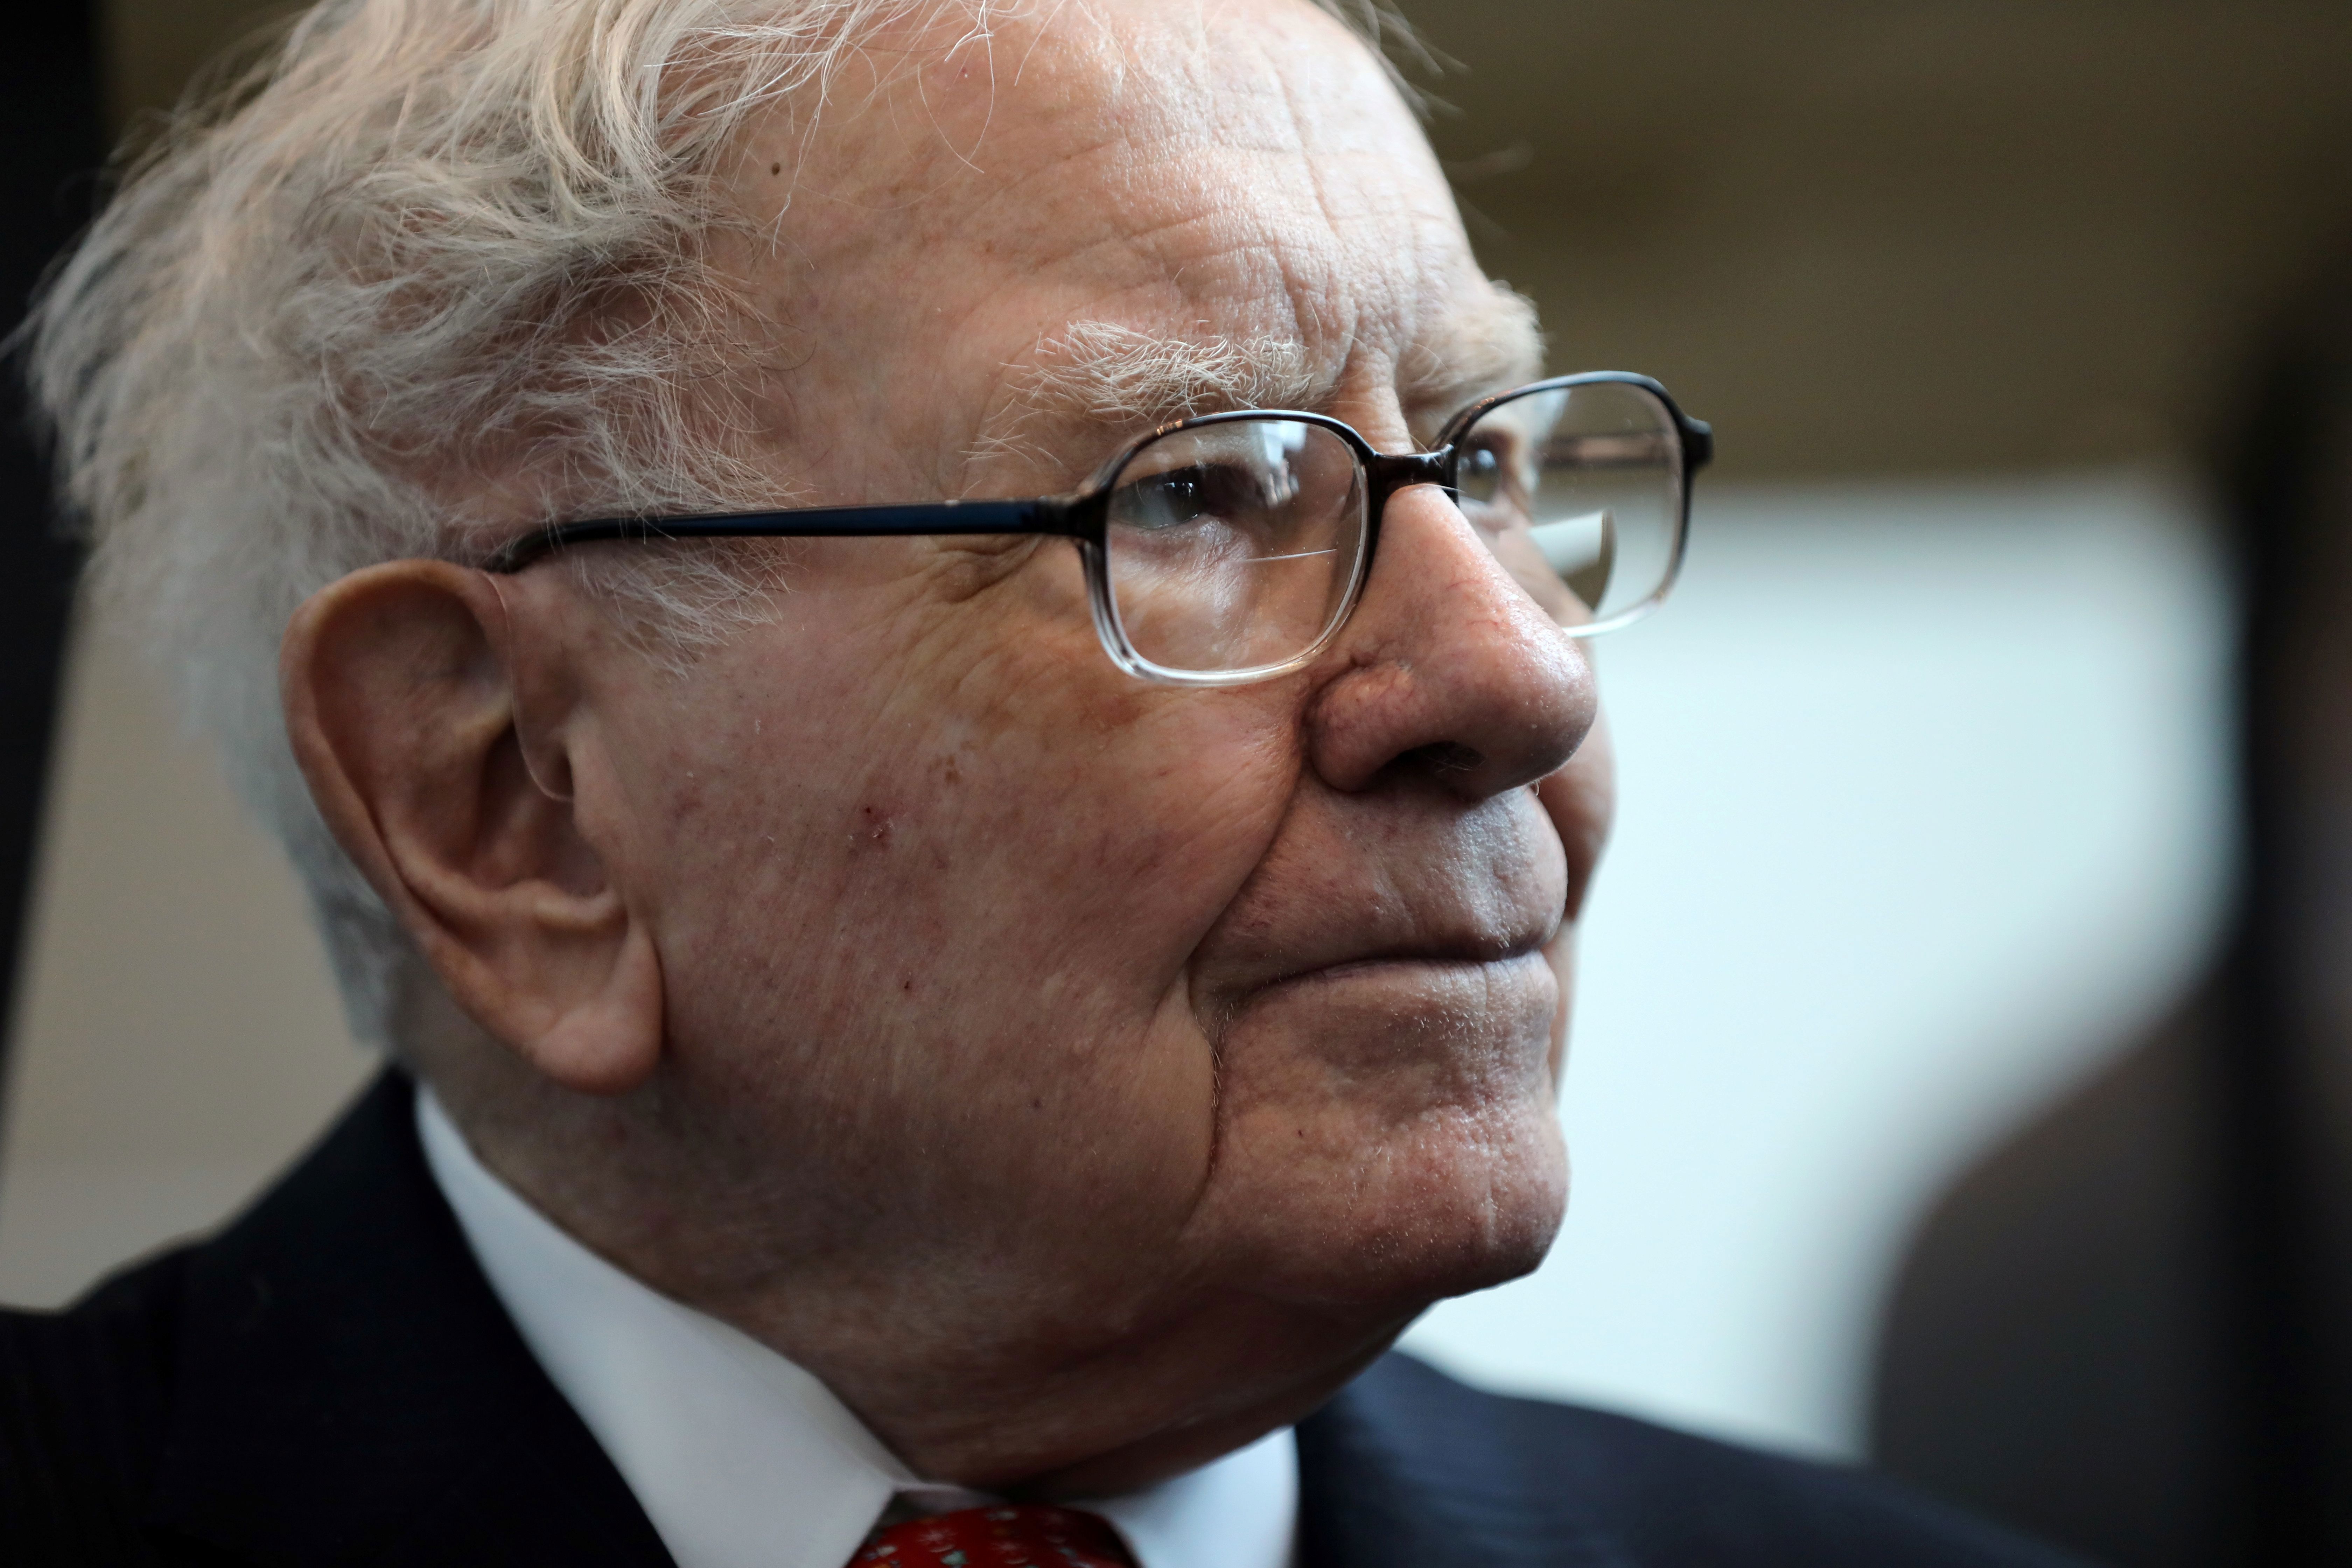 Warren Buffett finally reveals the mysterious company he’s invested $10 billion in